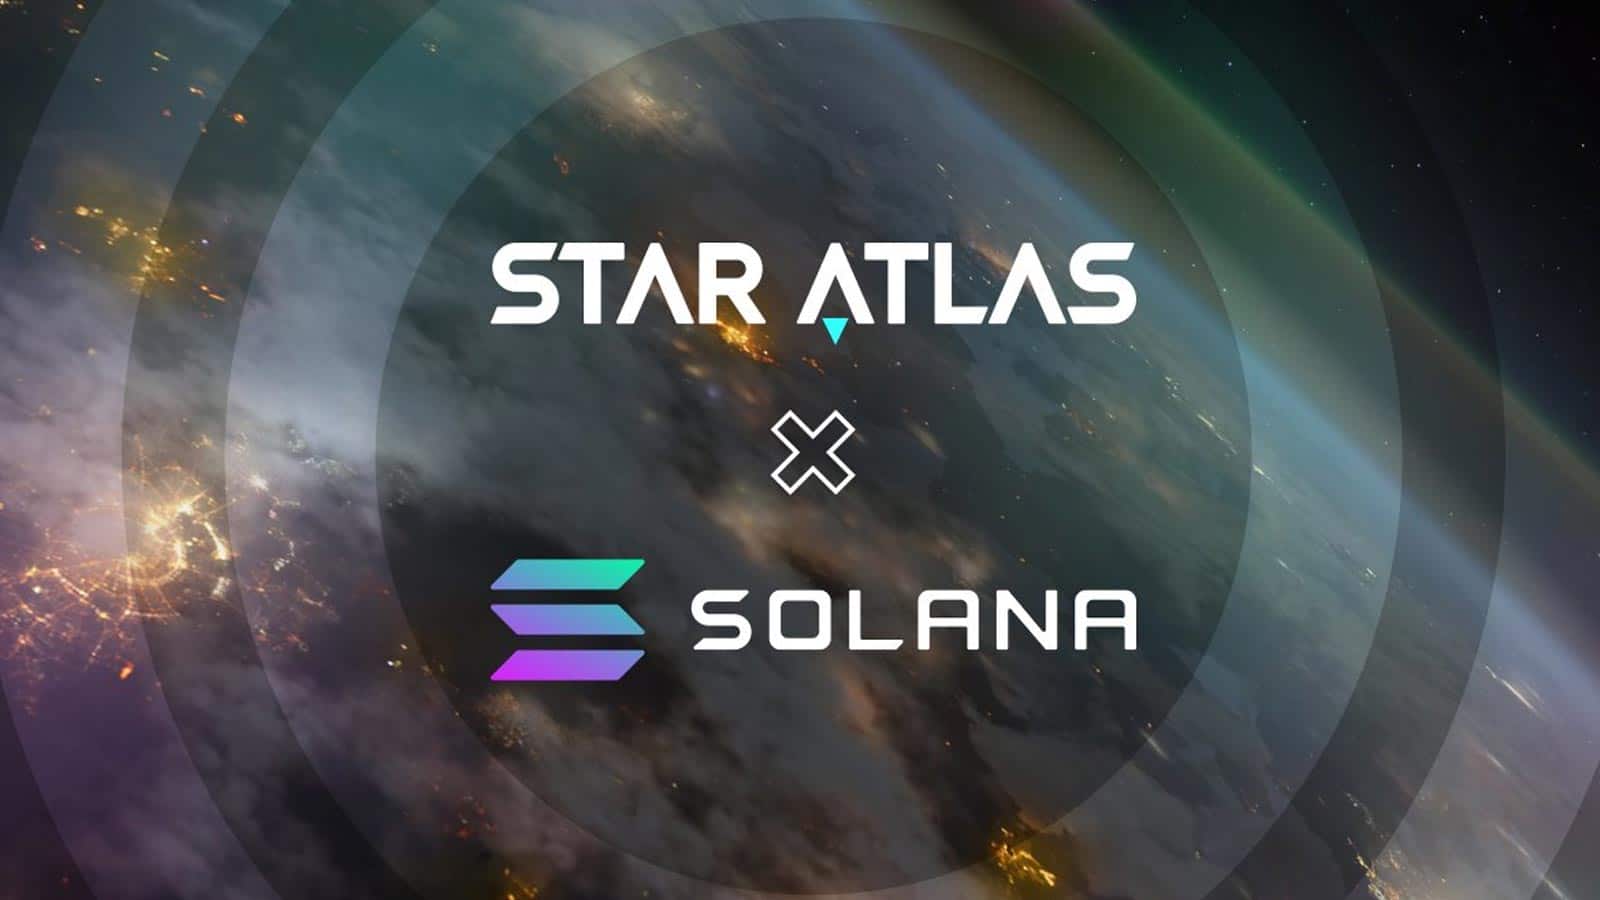 Star atlas polis token asset backed cryptocurrency